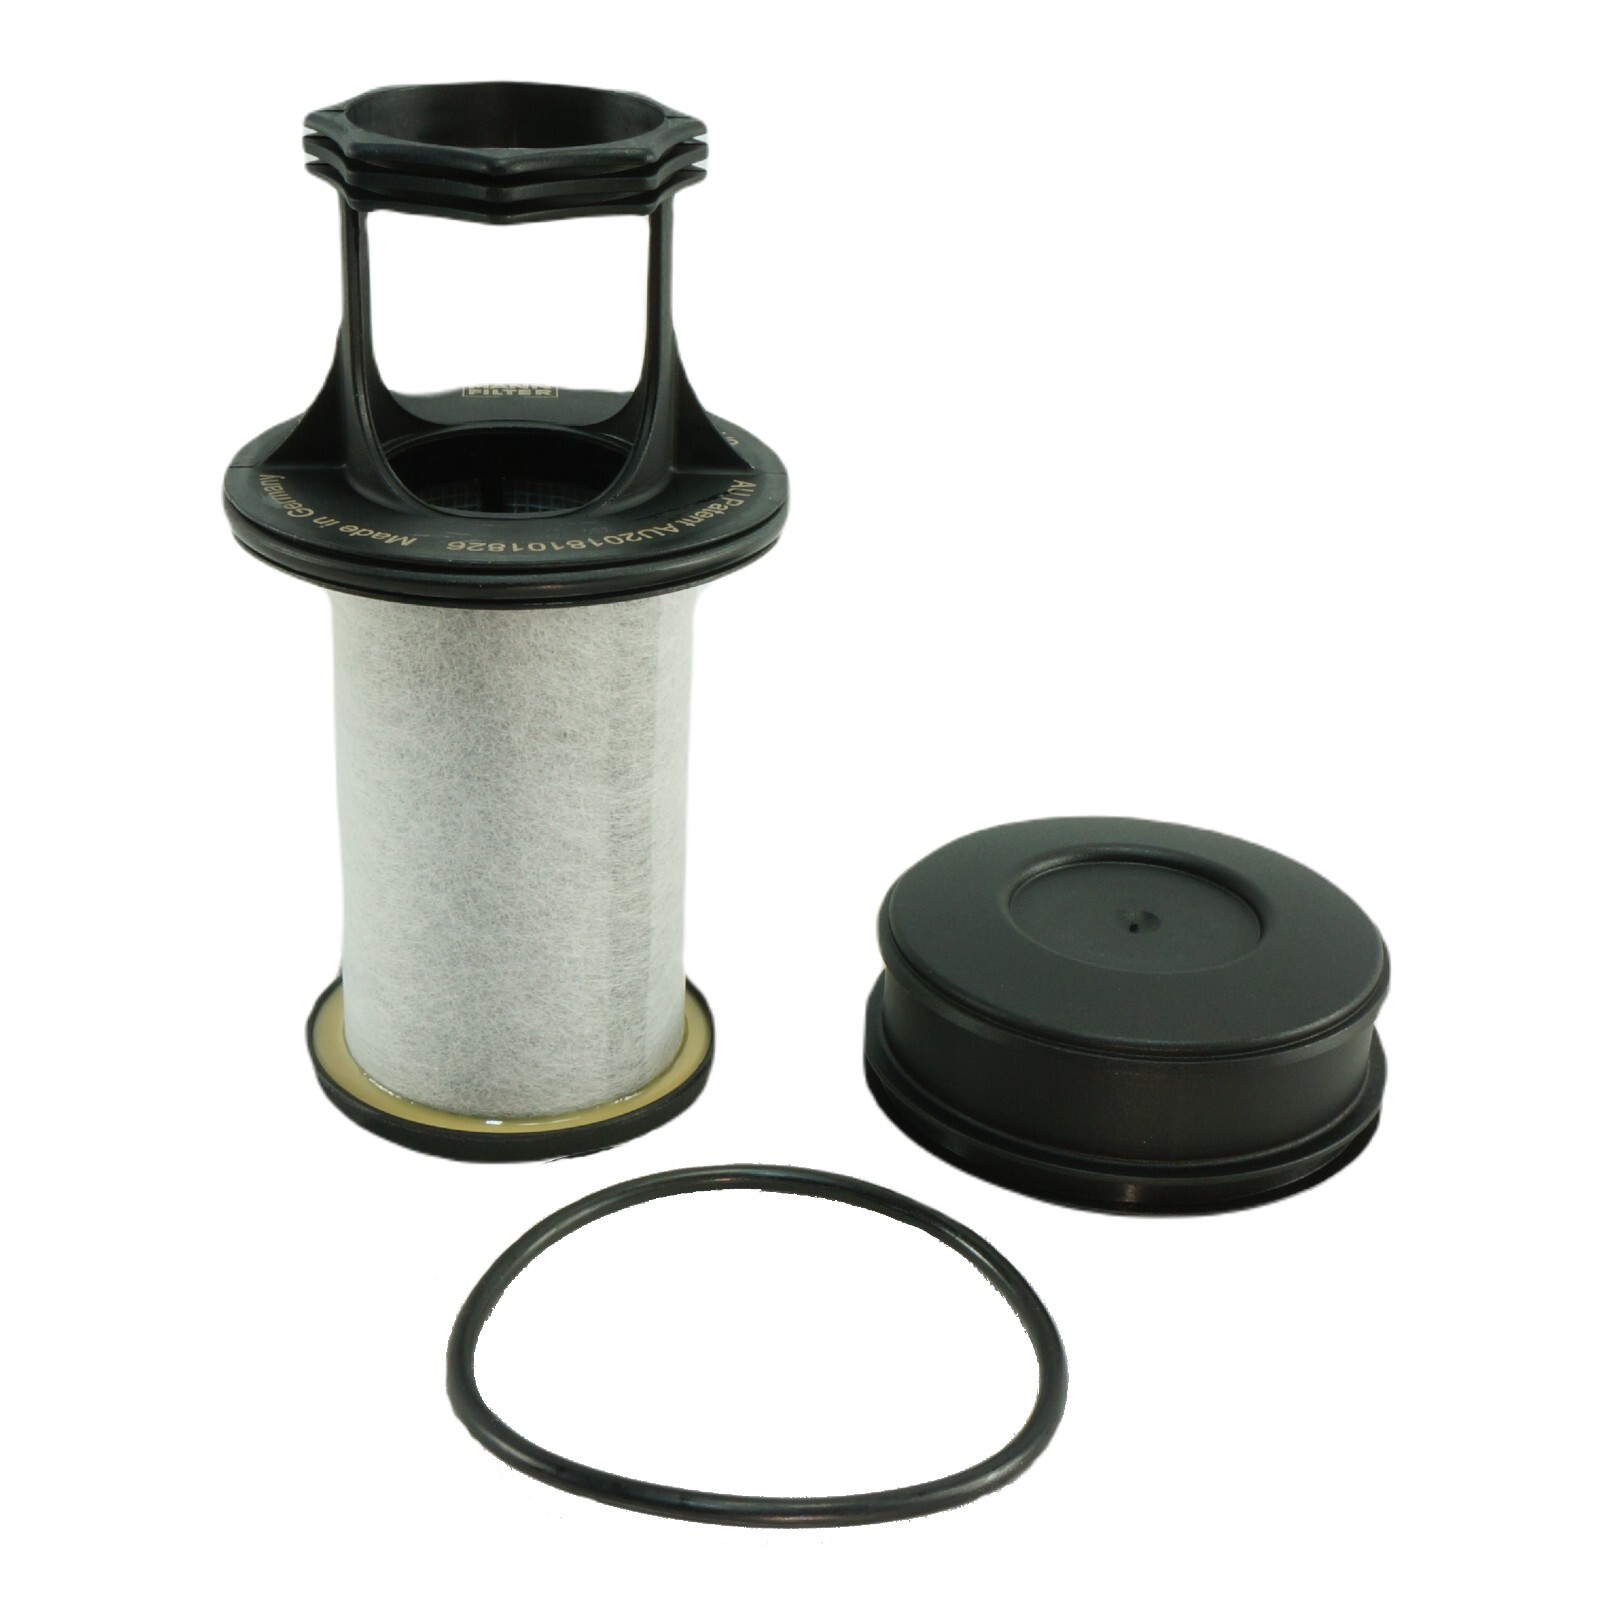 Western Filters Provent 200 Catch Can For Nissan Pathfinder R51 YD25DDTI 2005 - 2013 Spain Built